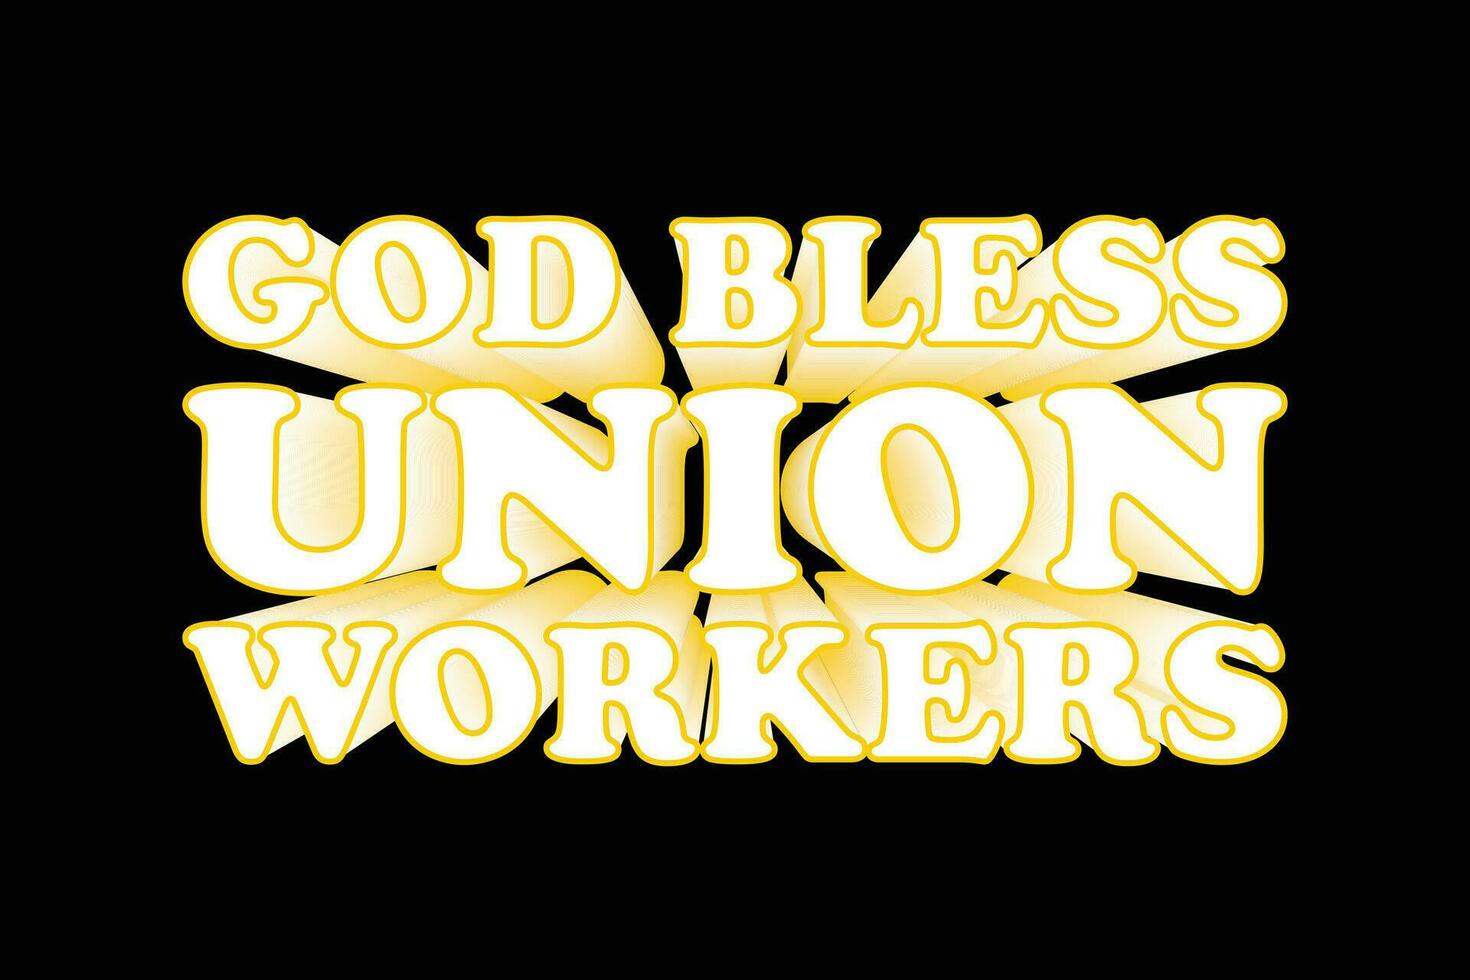 God bless union workers labor day t shirt vector